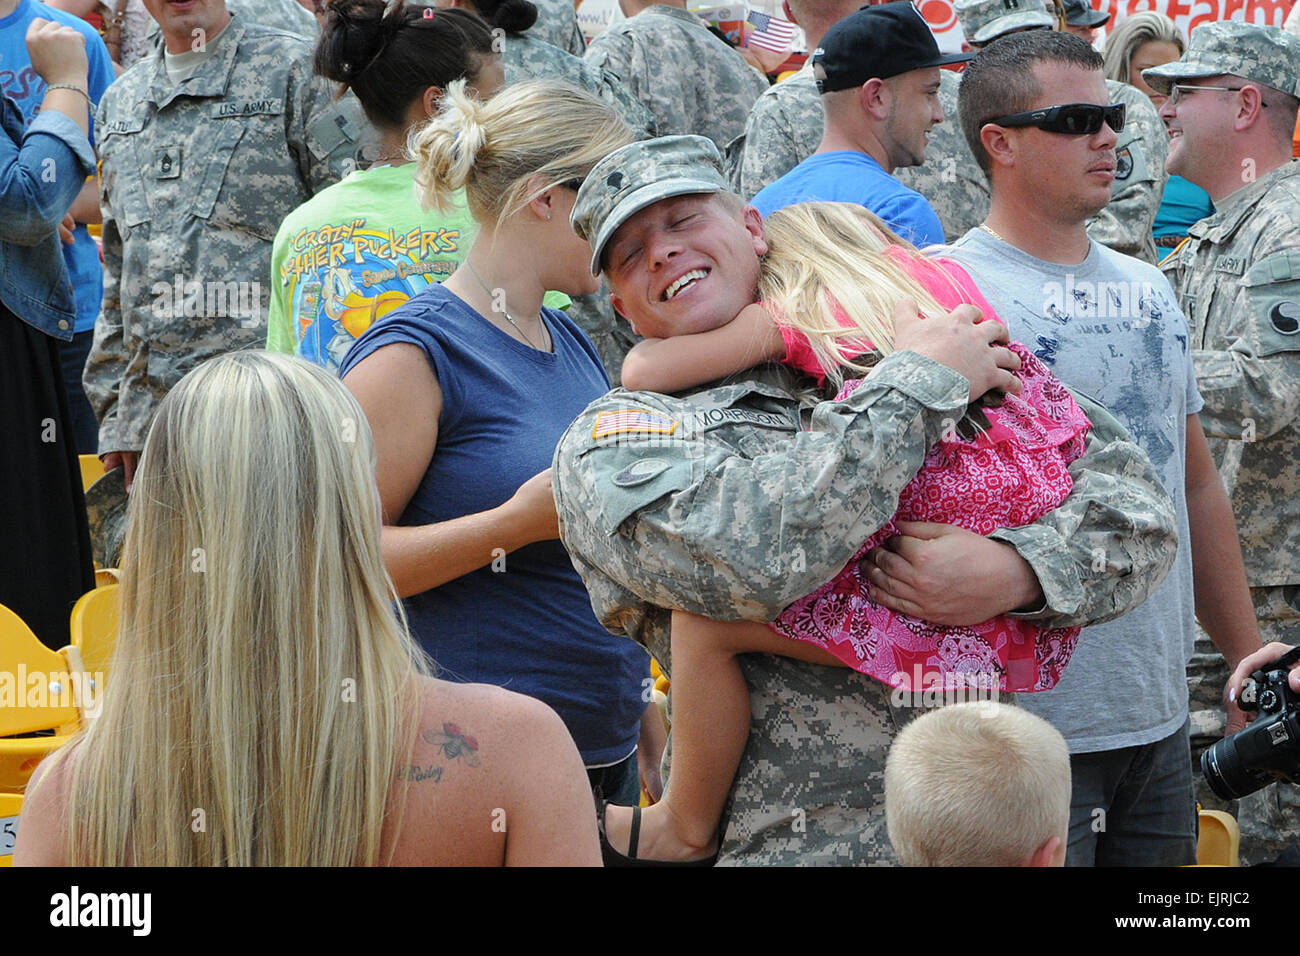 Spc. Daniel Morrison of the 1204th Aviation Support Battalion greets his family during the unit's welcome home ceremony at the Florence Freedom Baseball staudium in Florence, Ky., Aug. 18, 2012. The 1204th deployed last August to the Persian Gulf region in support of Operation New Dawn. Kentucky National Guard photo by Sgt. Scott Raymond Stock Photo